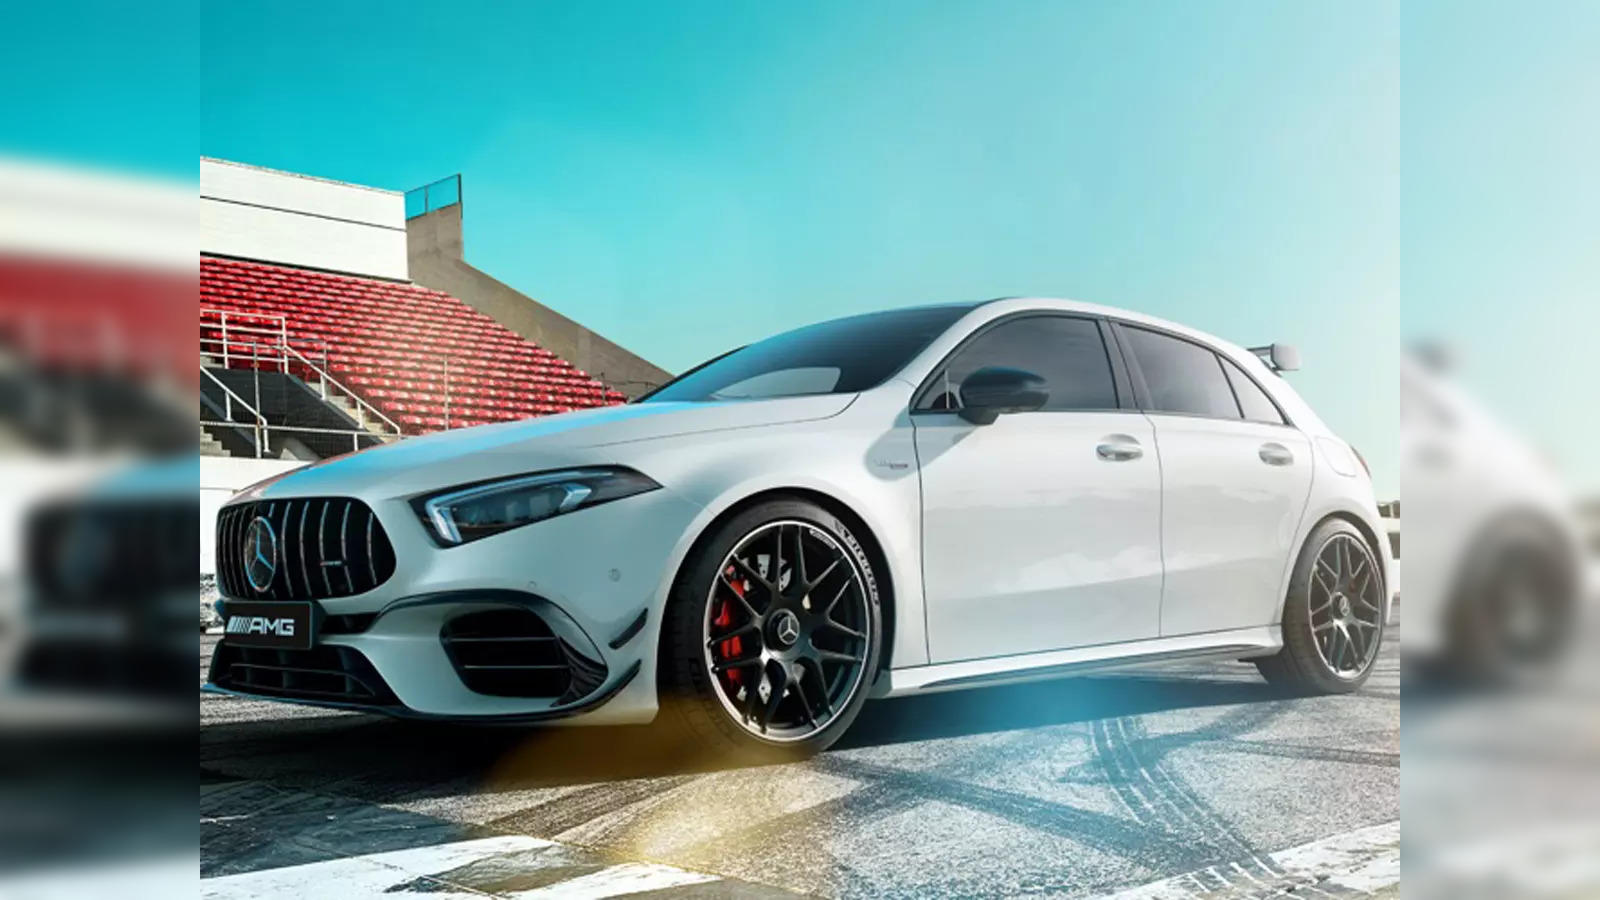 mercedes: Mercedes-Benz brings all-new AMG A 45 S 4MATIC+ to India at Rs  79.5 lakh - The Economic Times